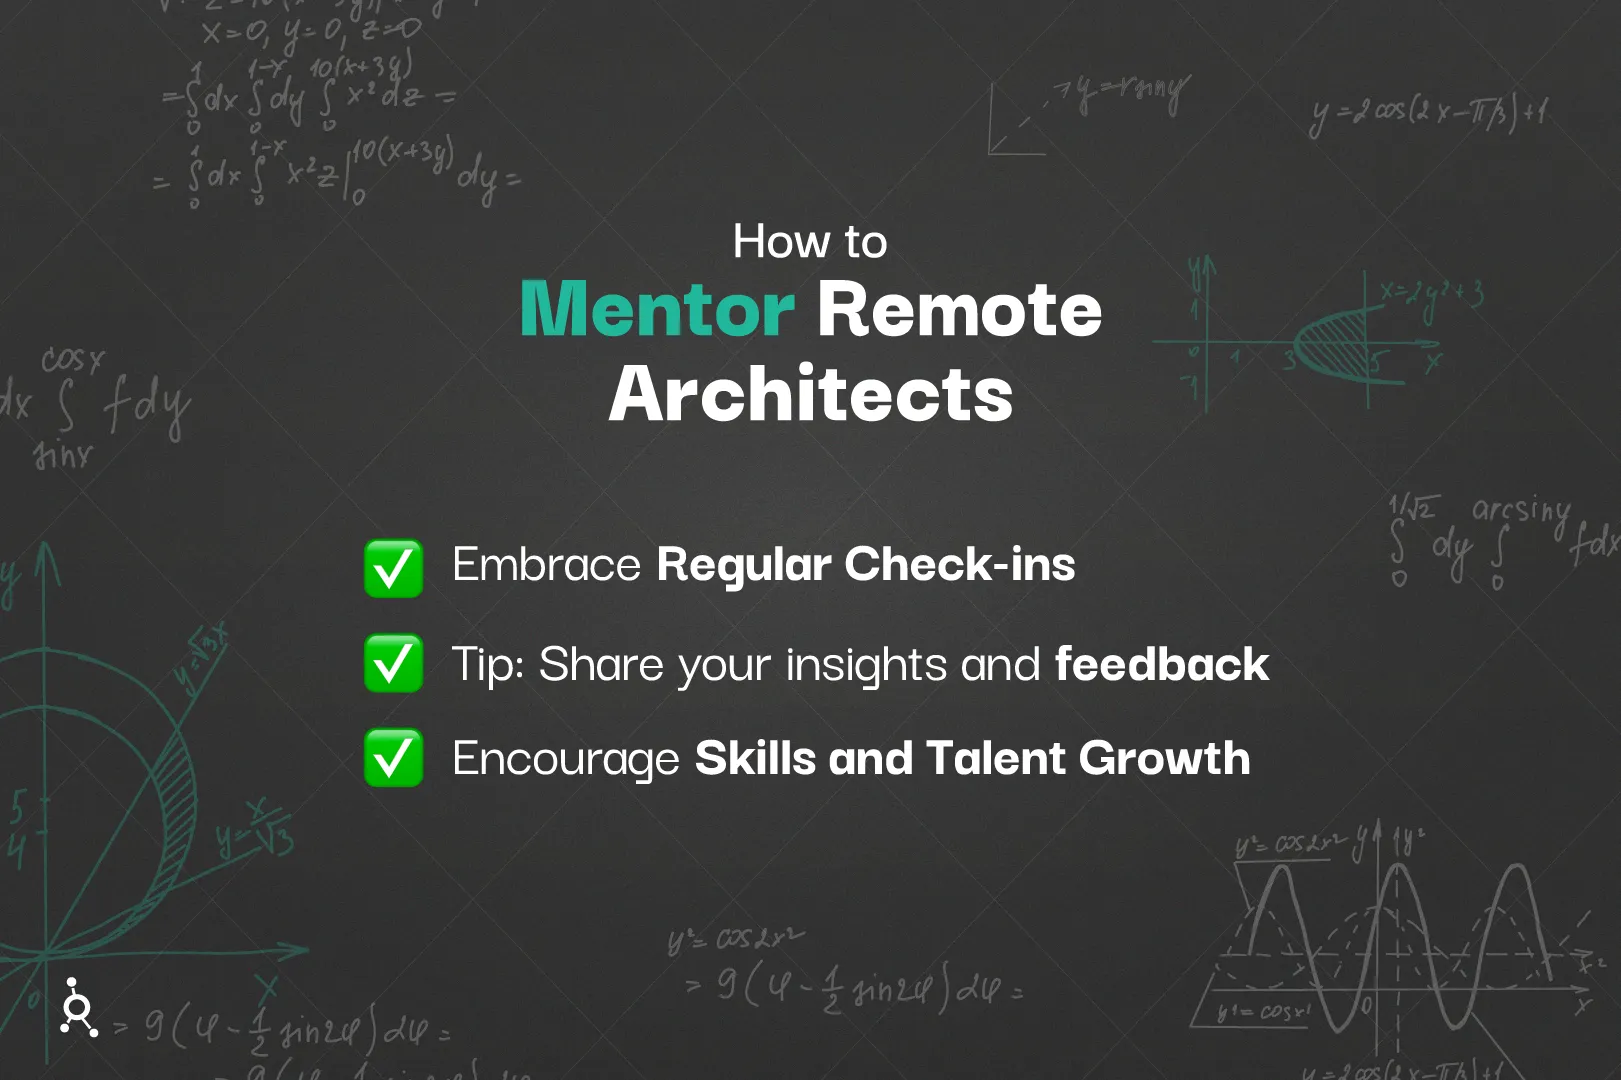 Mentor Remote Architects